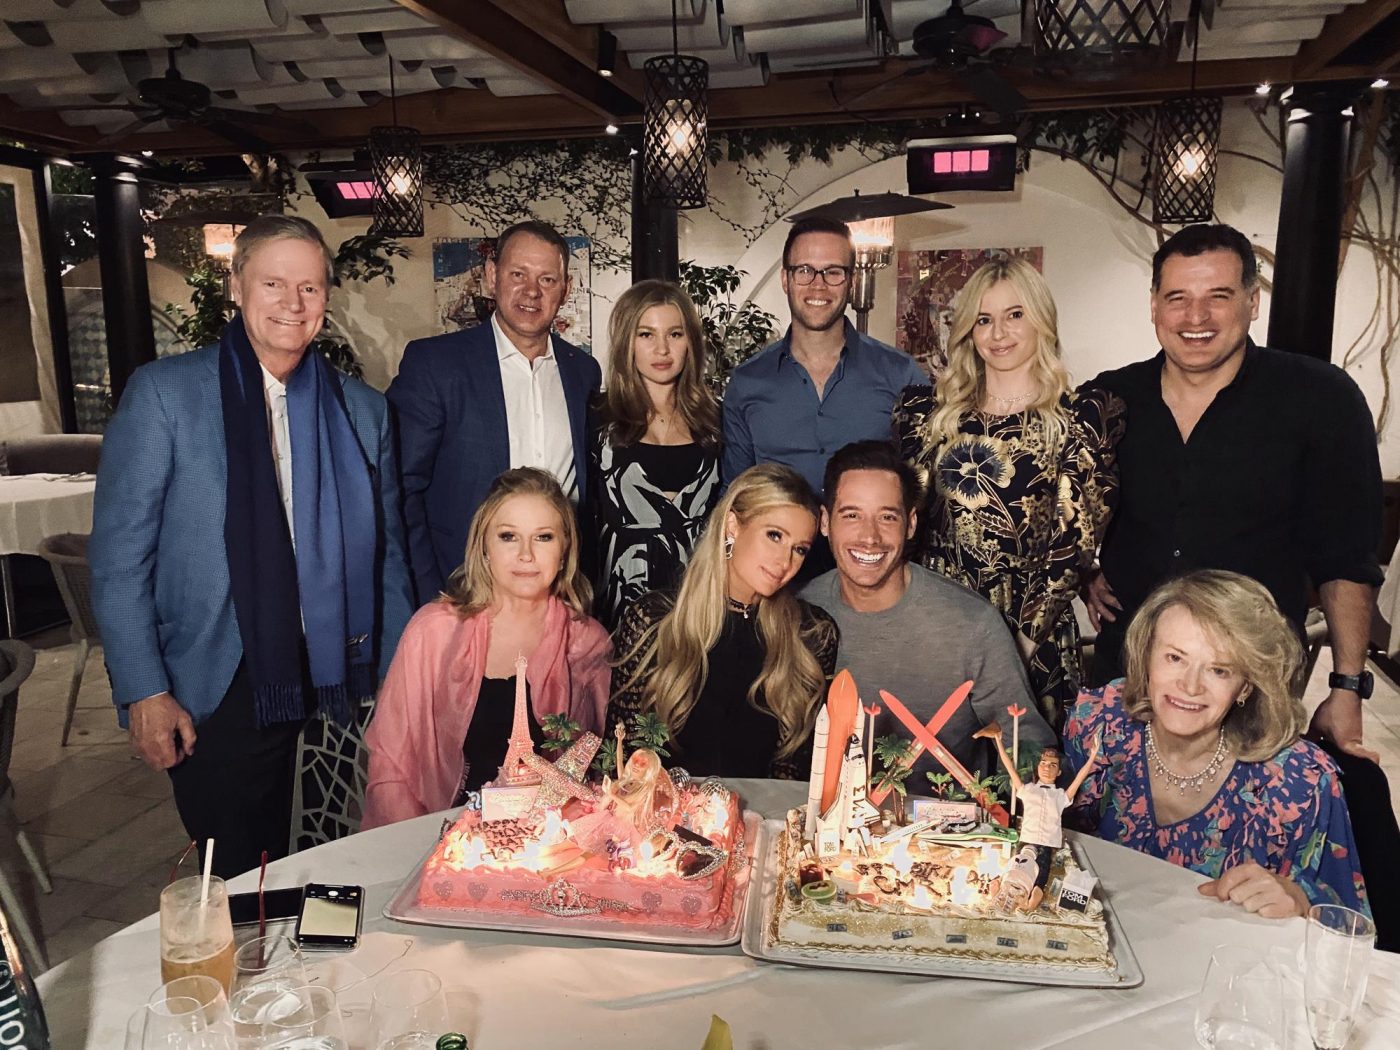 Paris and Carter celebrating their birthdays with their families, 2020